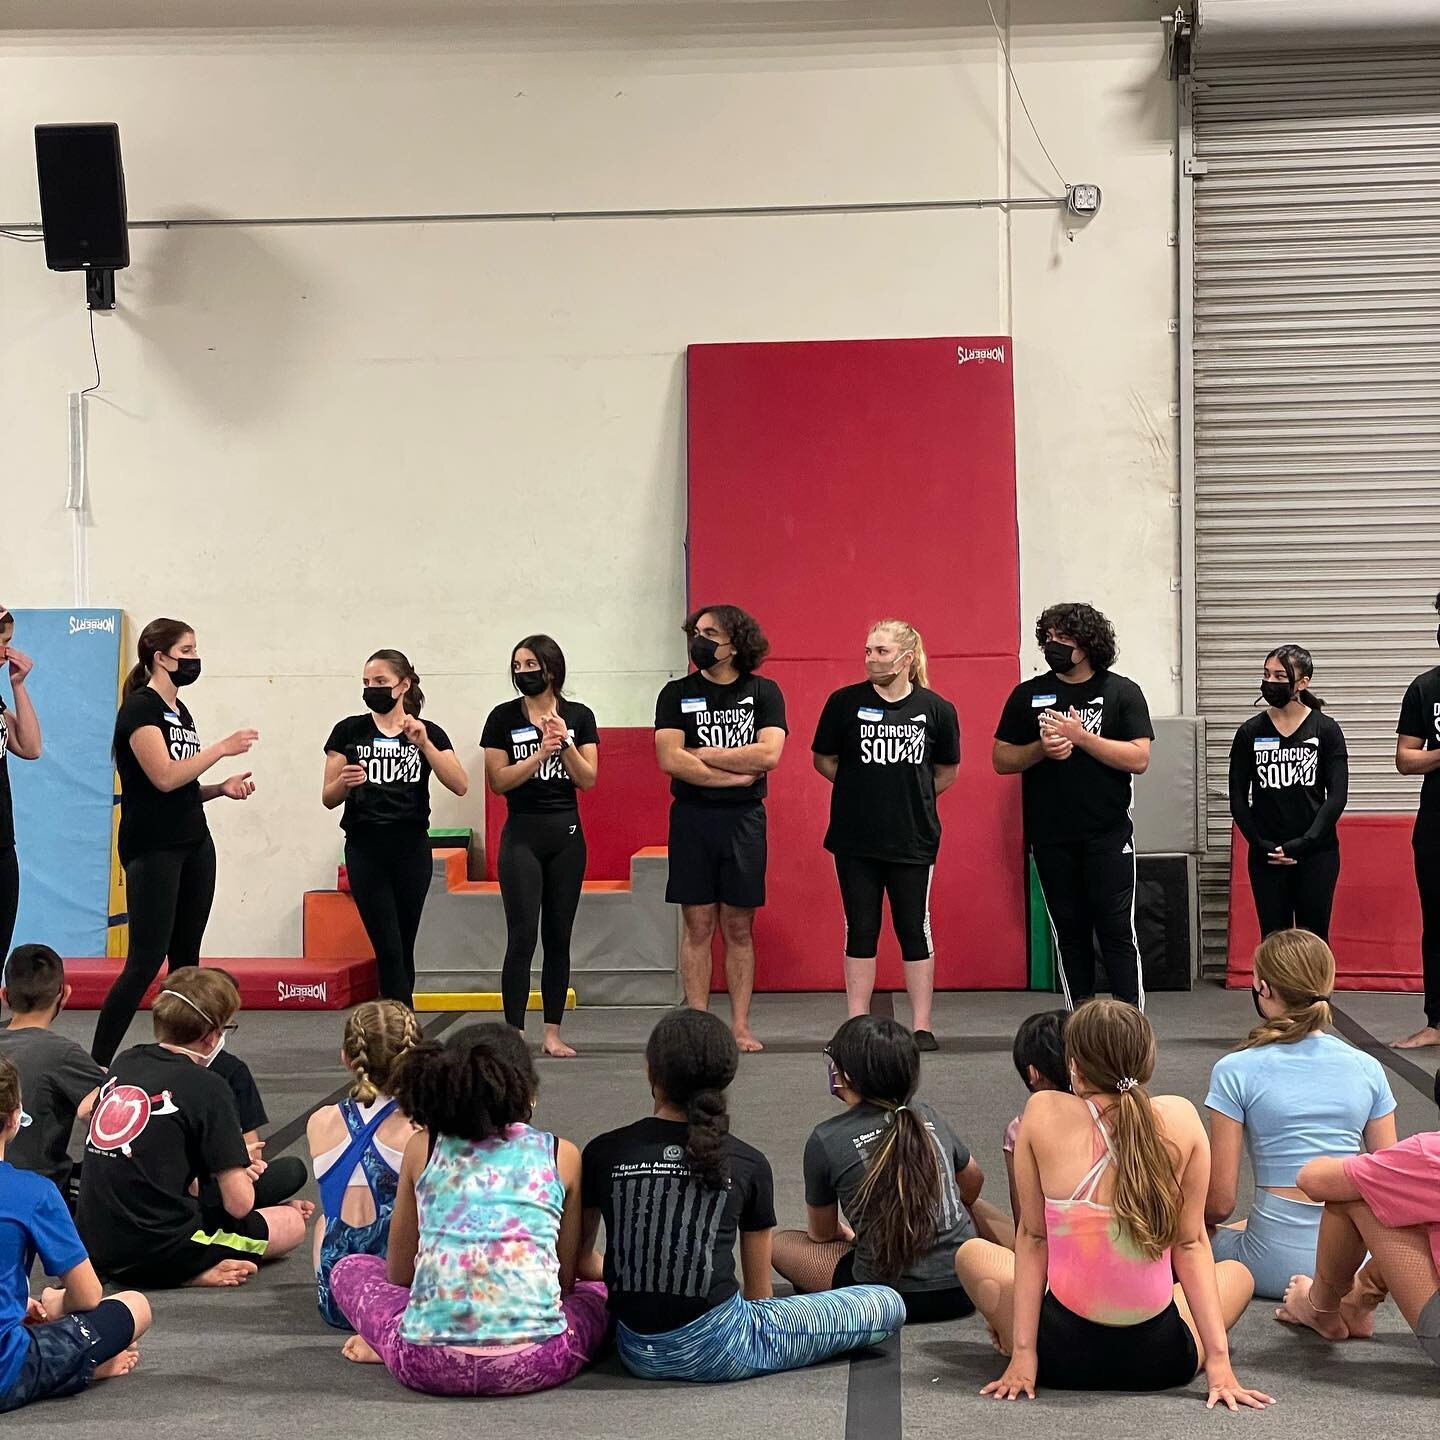 Congratulations to the Do Circus Squad on their successful circus workshop. A great opportunity for circus students to try new skills. 

#docircus #ccac #docircussquad  #youthcircus #circus #redlands